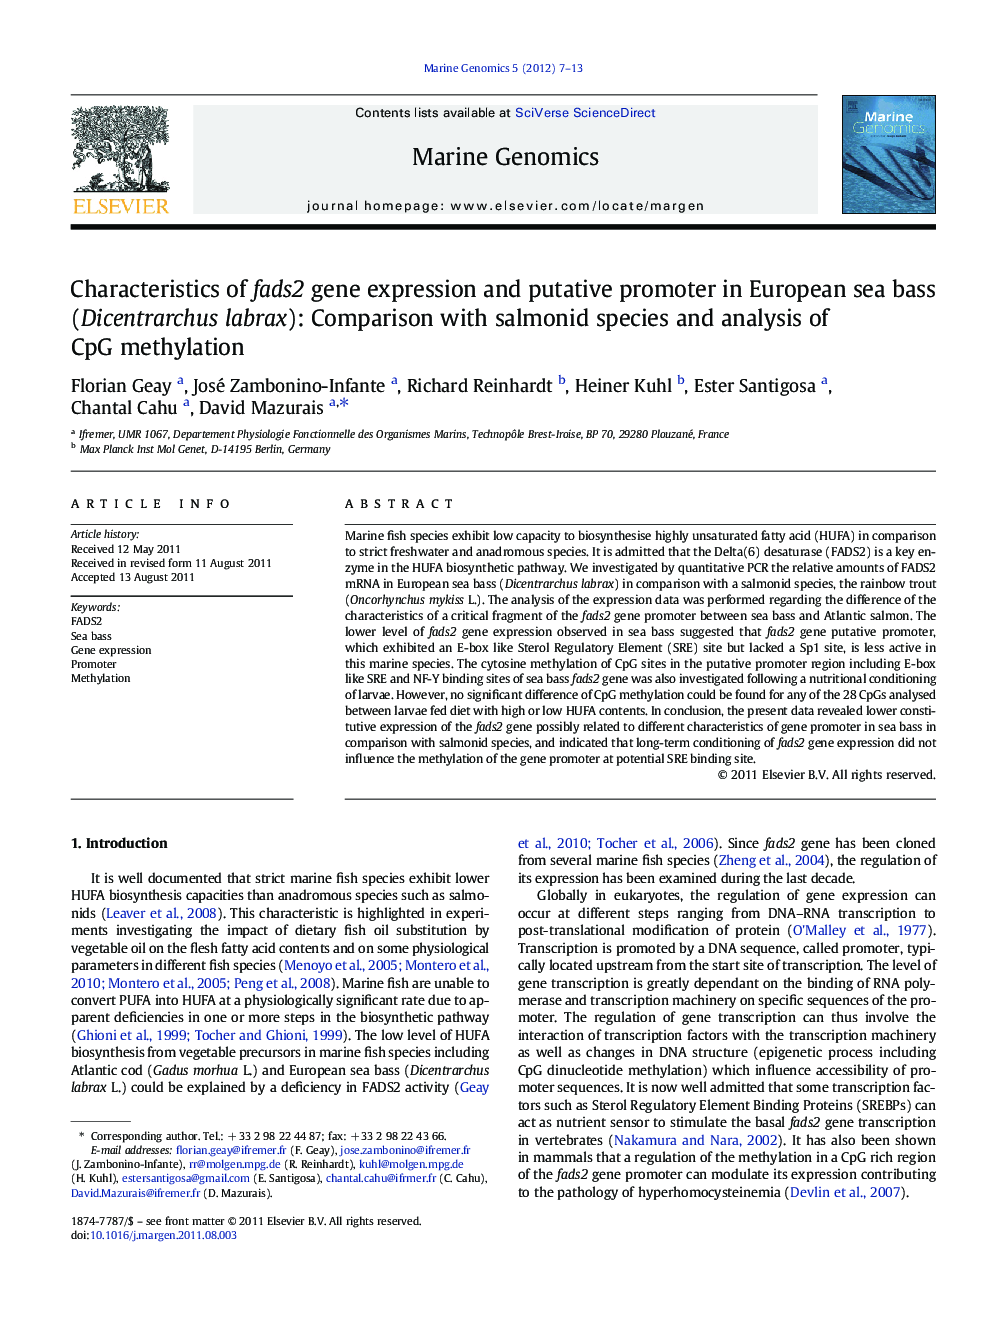 Characteristics of fads2 gene expression and putative promoter in European sea bass (Dicentrarchus labrax): Comparison with salmonid species and analysis of CpG methylation